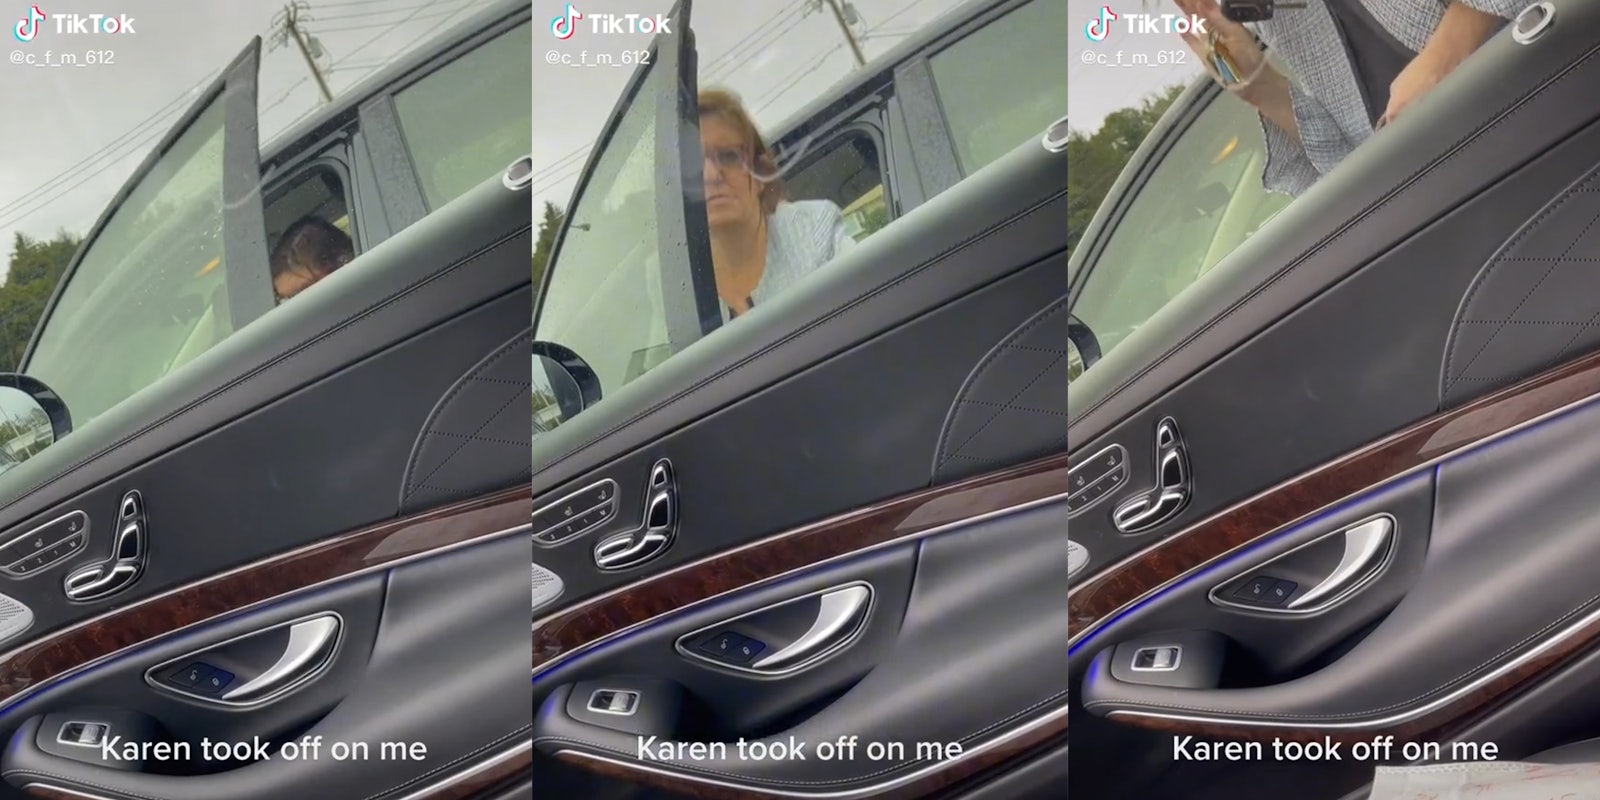 woman getting out of car bangs door against a nearby car, sees her error, then climbs back in the driver's seat with caption 'Karen took off on me'